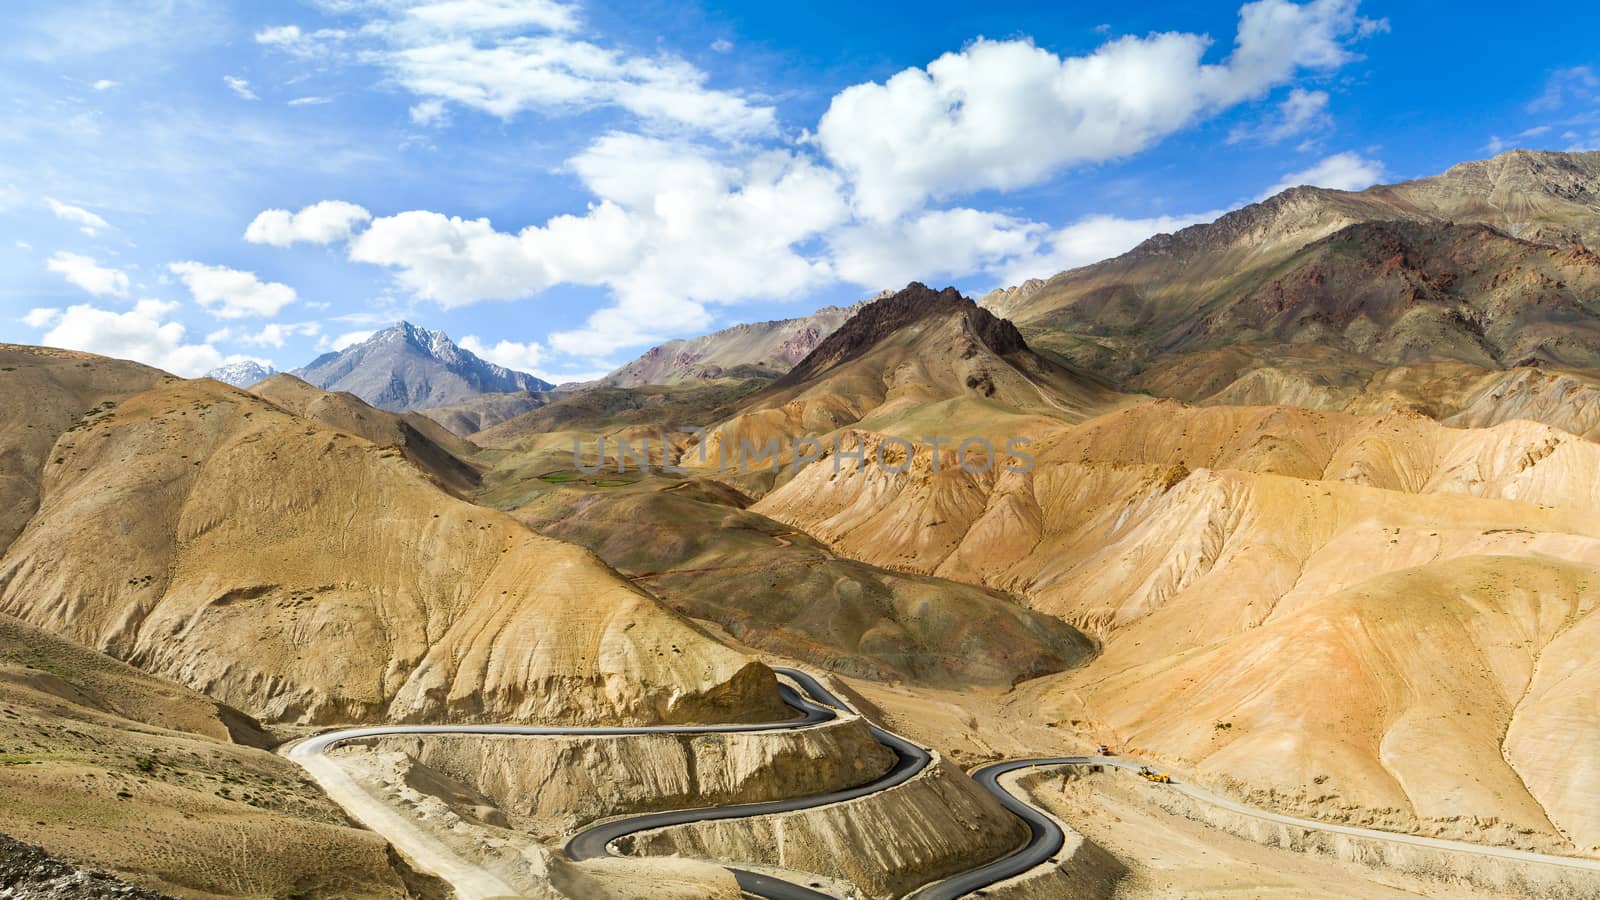 The new winding road in the Himalayas mountains between Leh and Kargil at the sunny summer day (Ladakh, India)